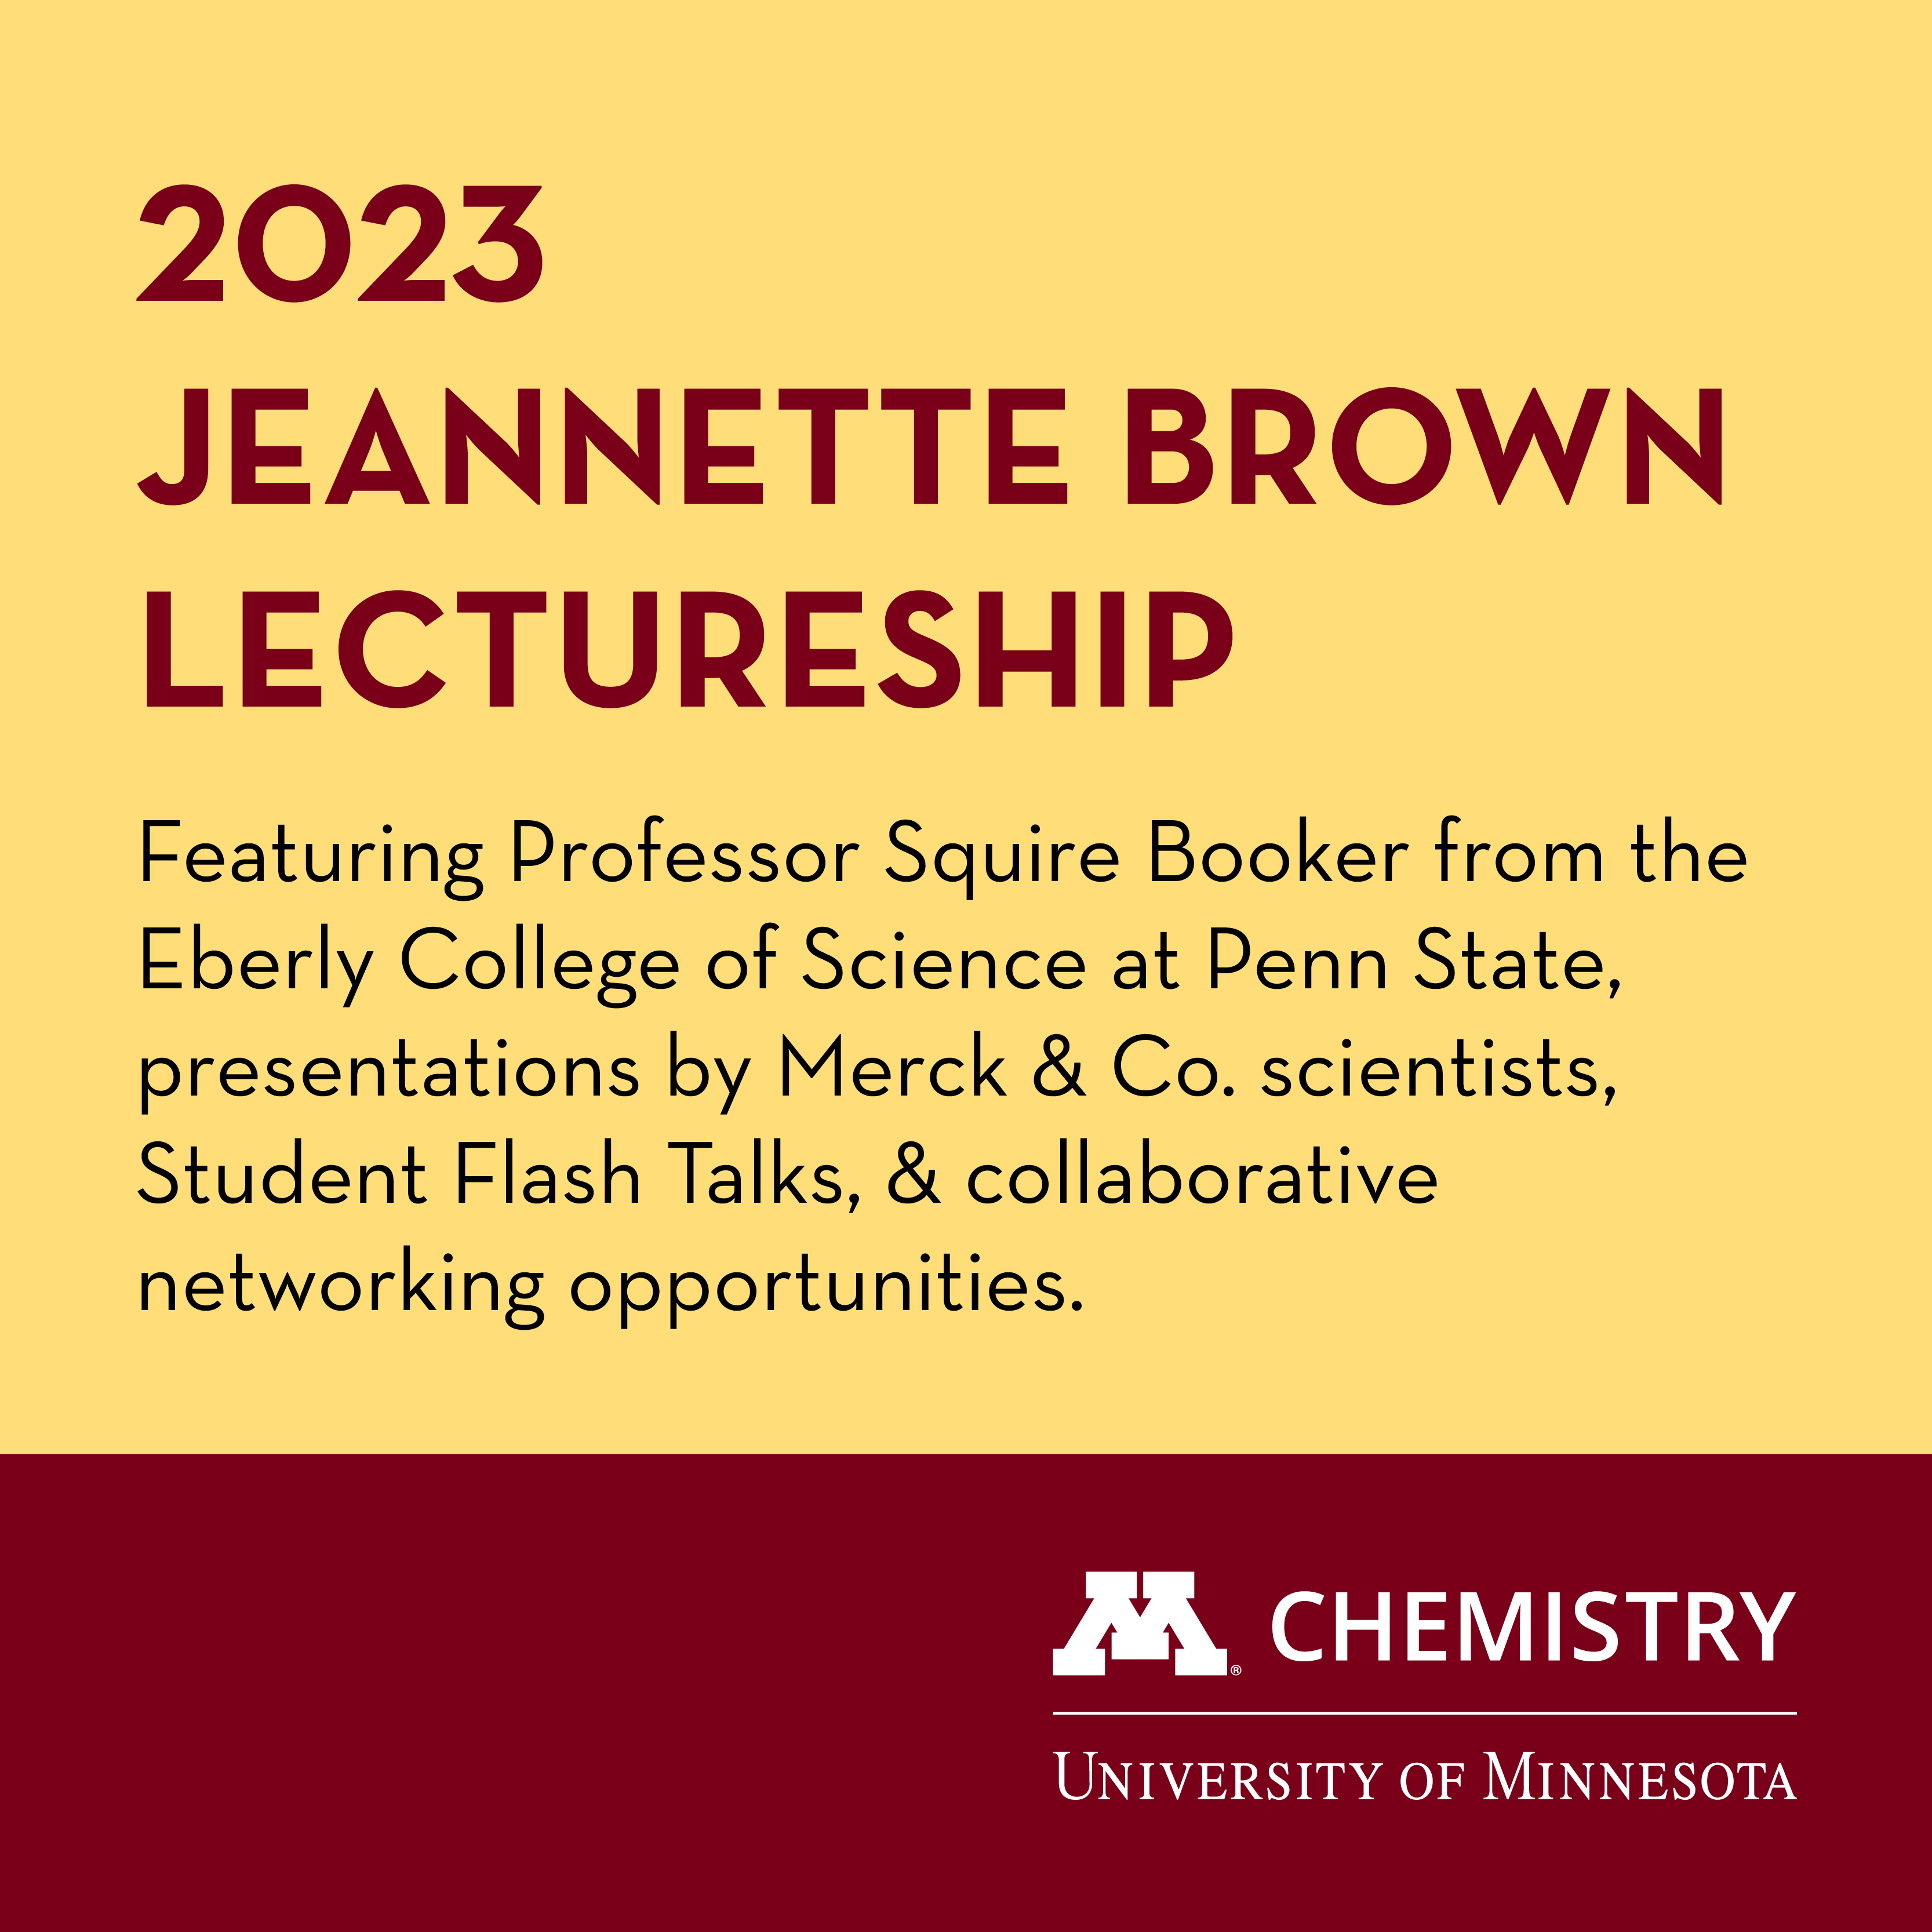 Featuring Professor Squire Booker from the Eberly College of Science at Penn State, presentations by Merck & Co. scientists, Student Flash Talks, & collaborative networking opportunities.